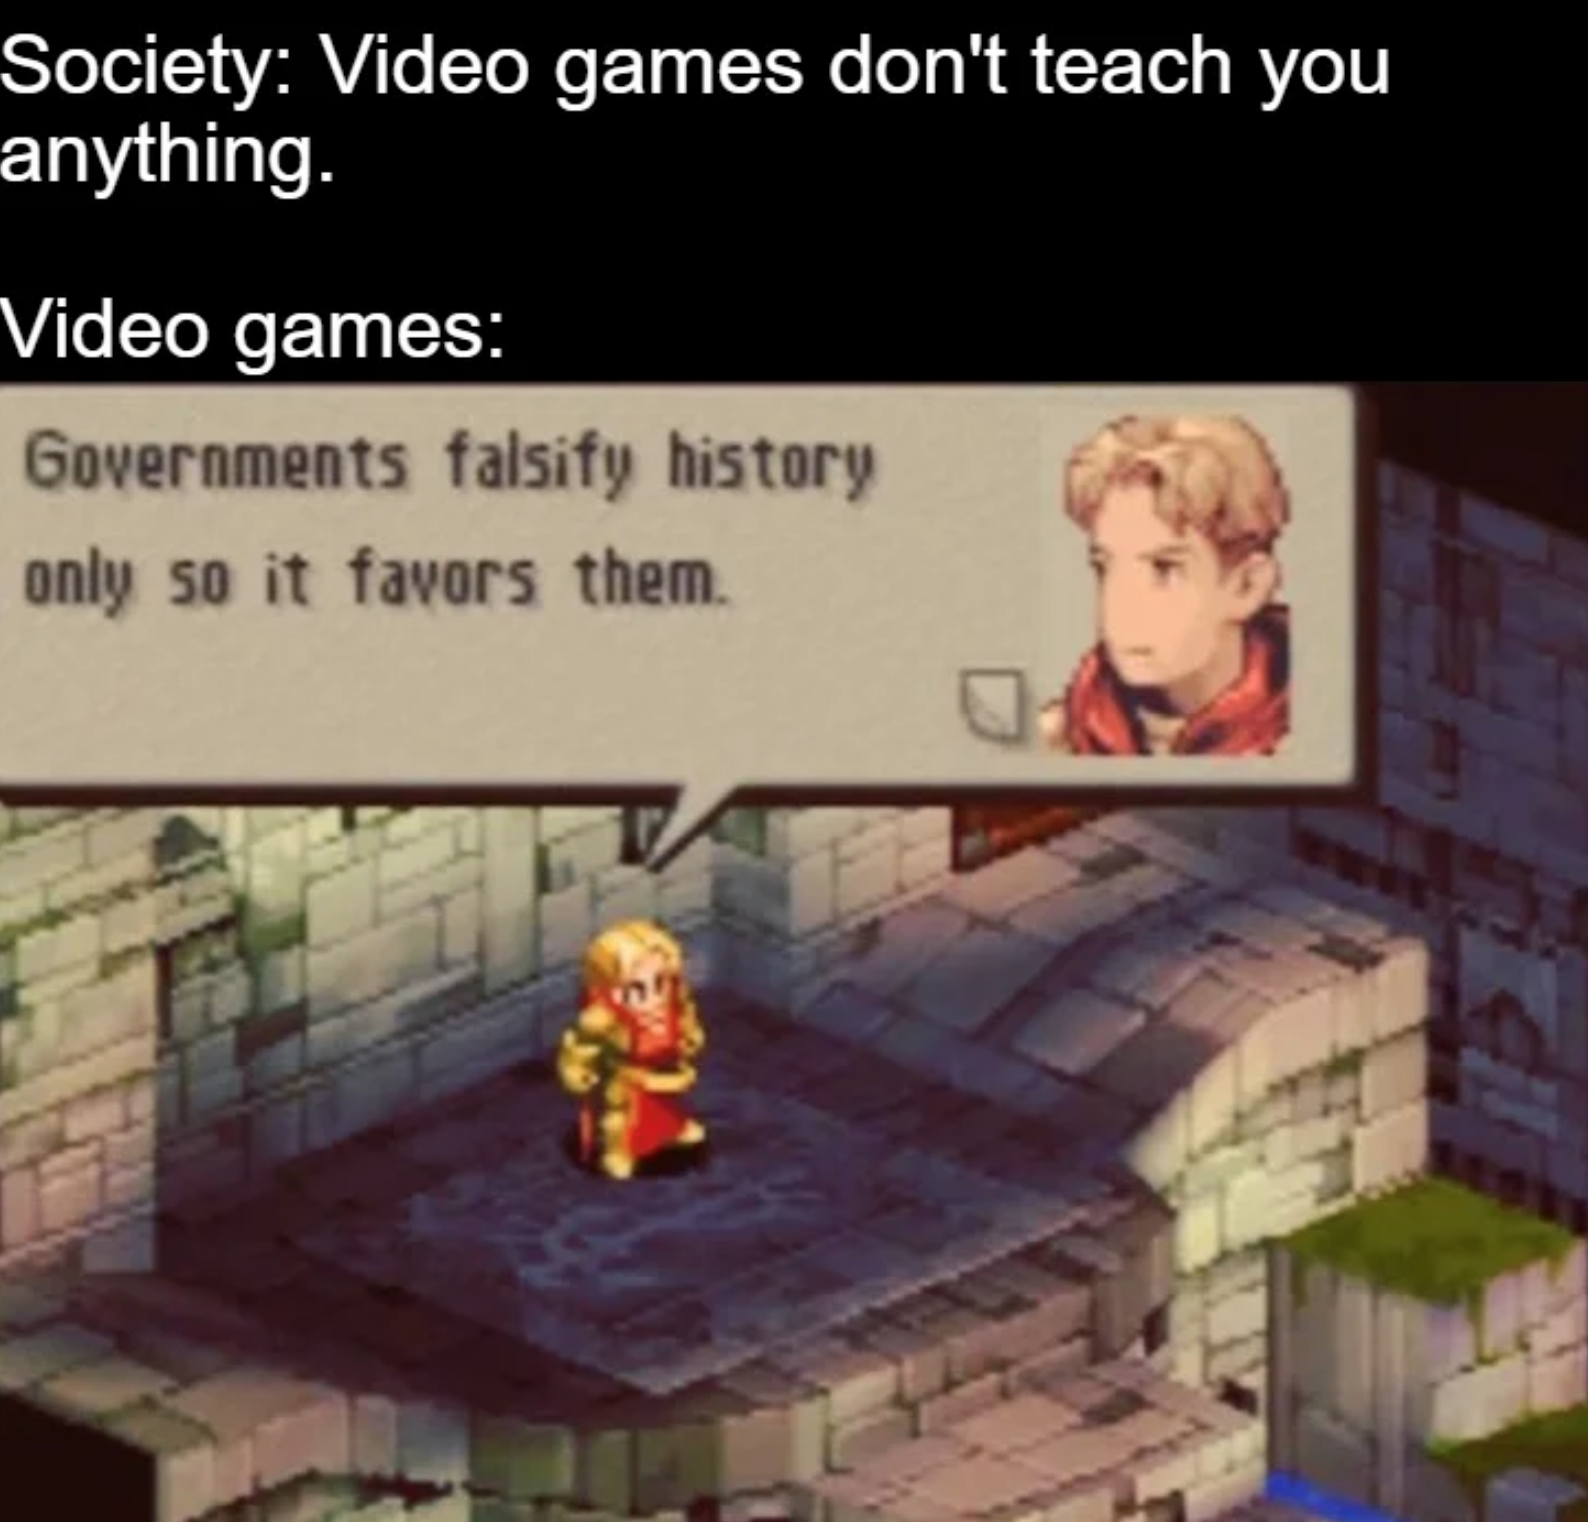 funny gaming memes - games - Society Video games don't teach you anything. Video games Governments falsify history only so it favors them.